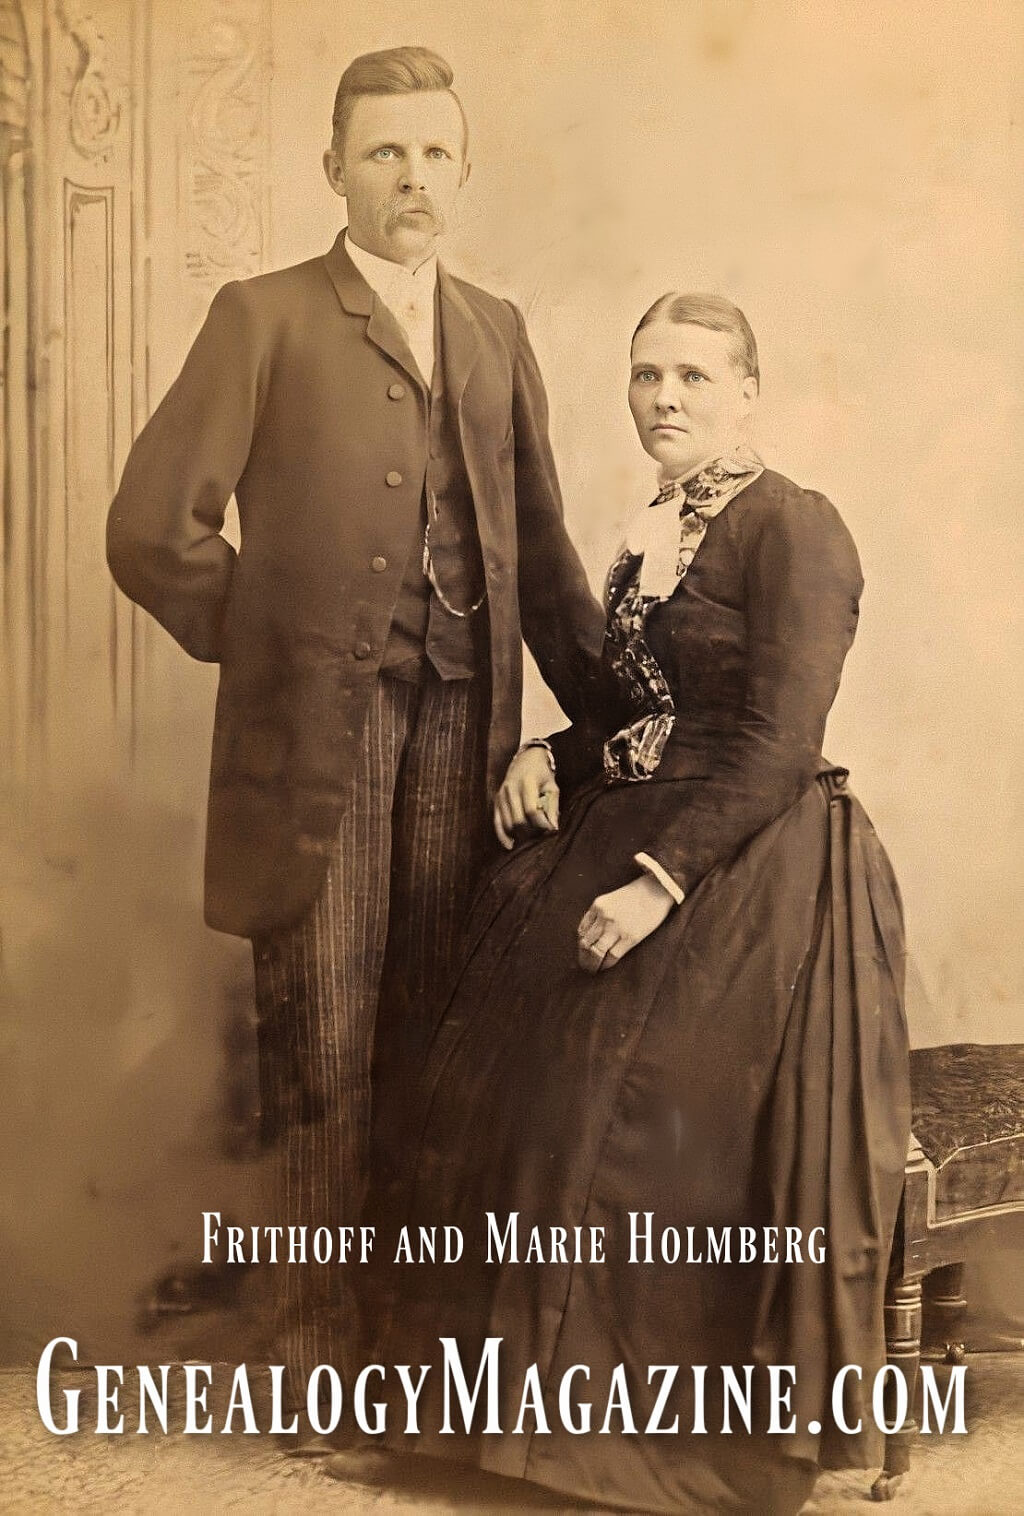 Frithoff and Marie Holmberg